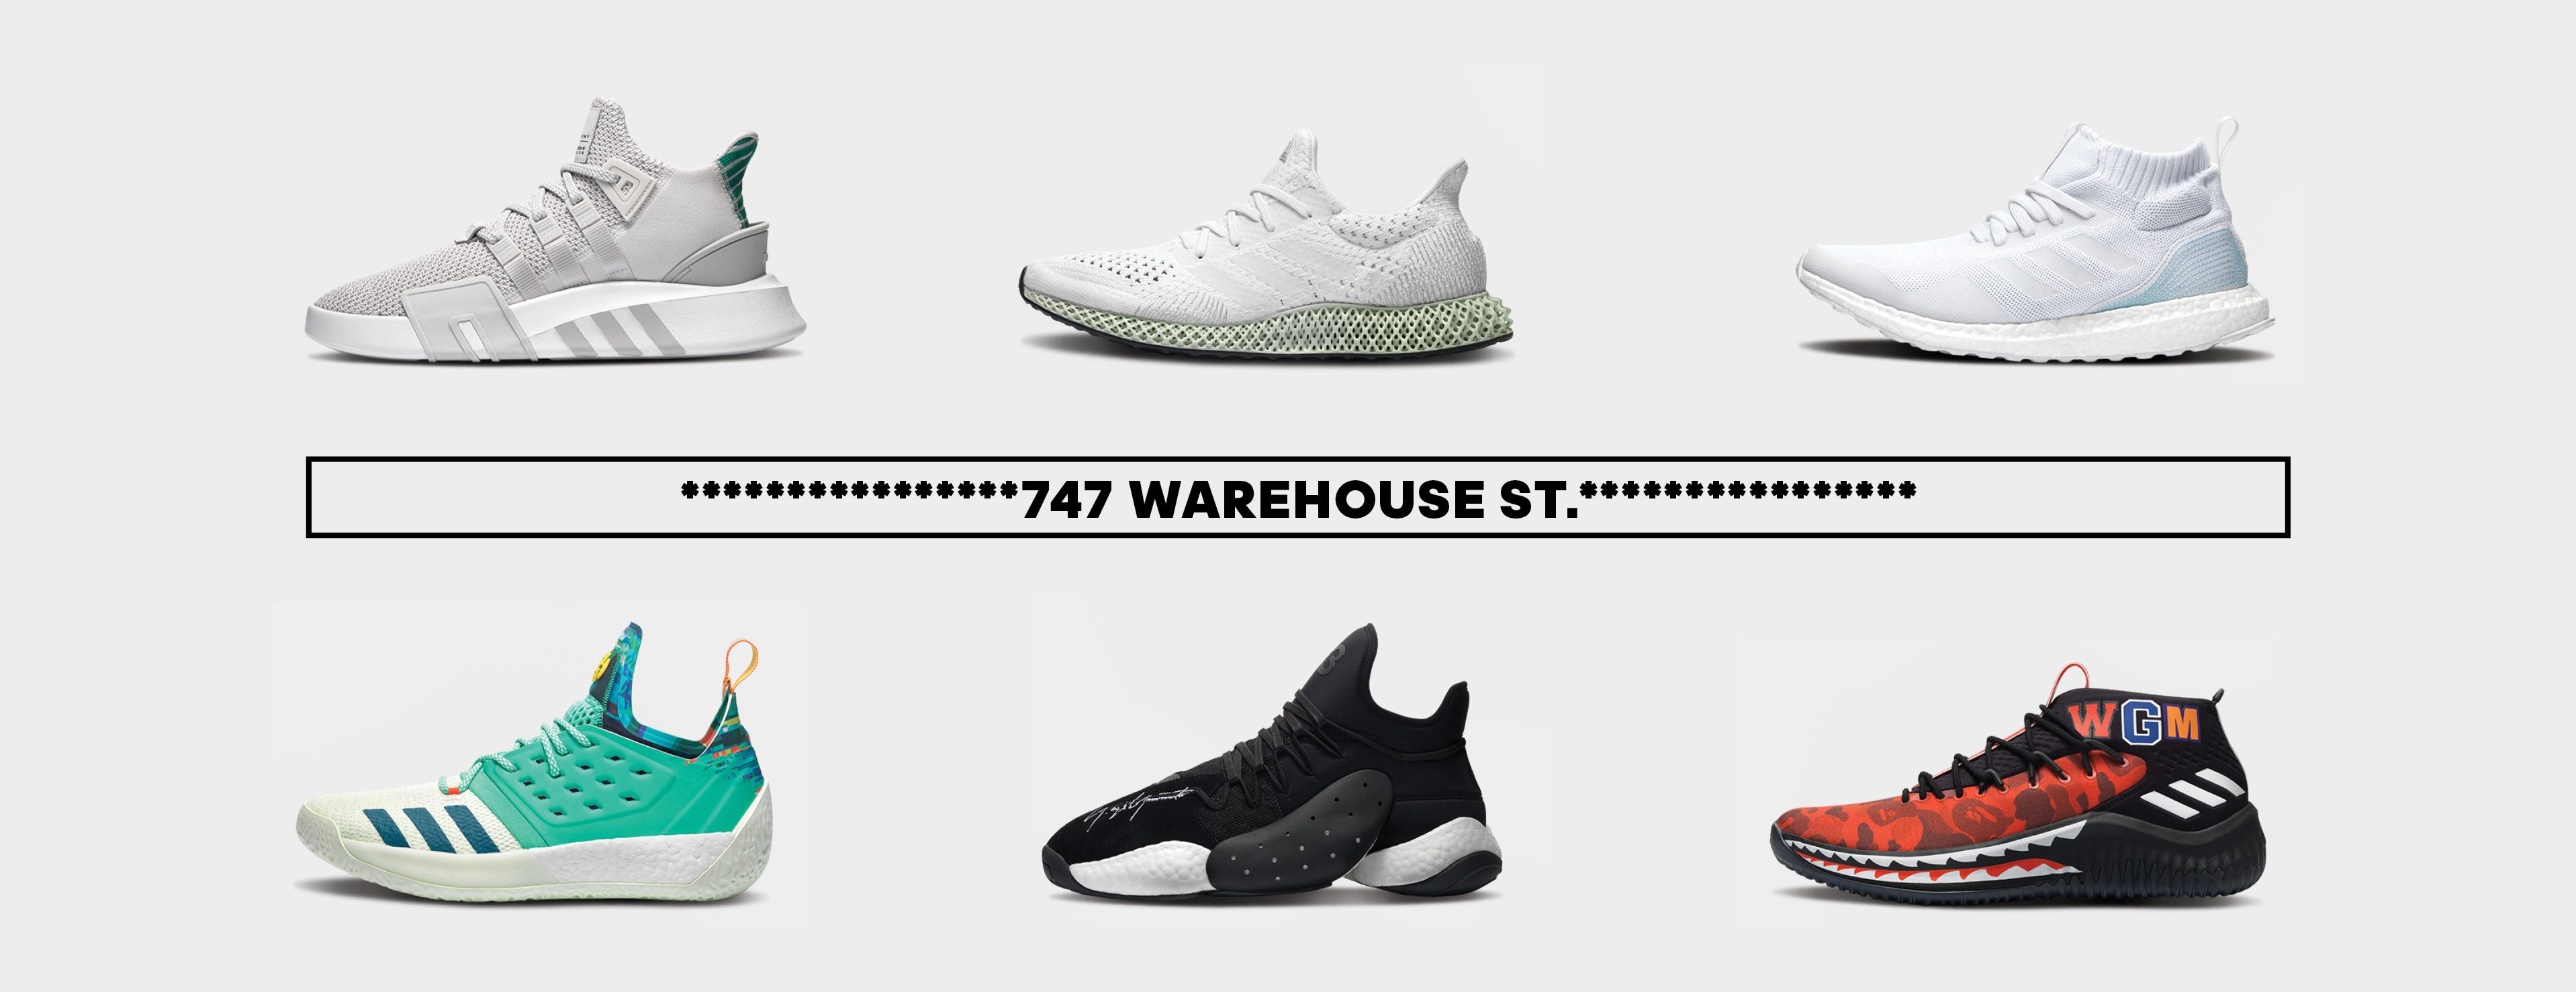 adidas all-star weekend releases 747 warehouse st